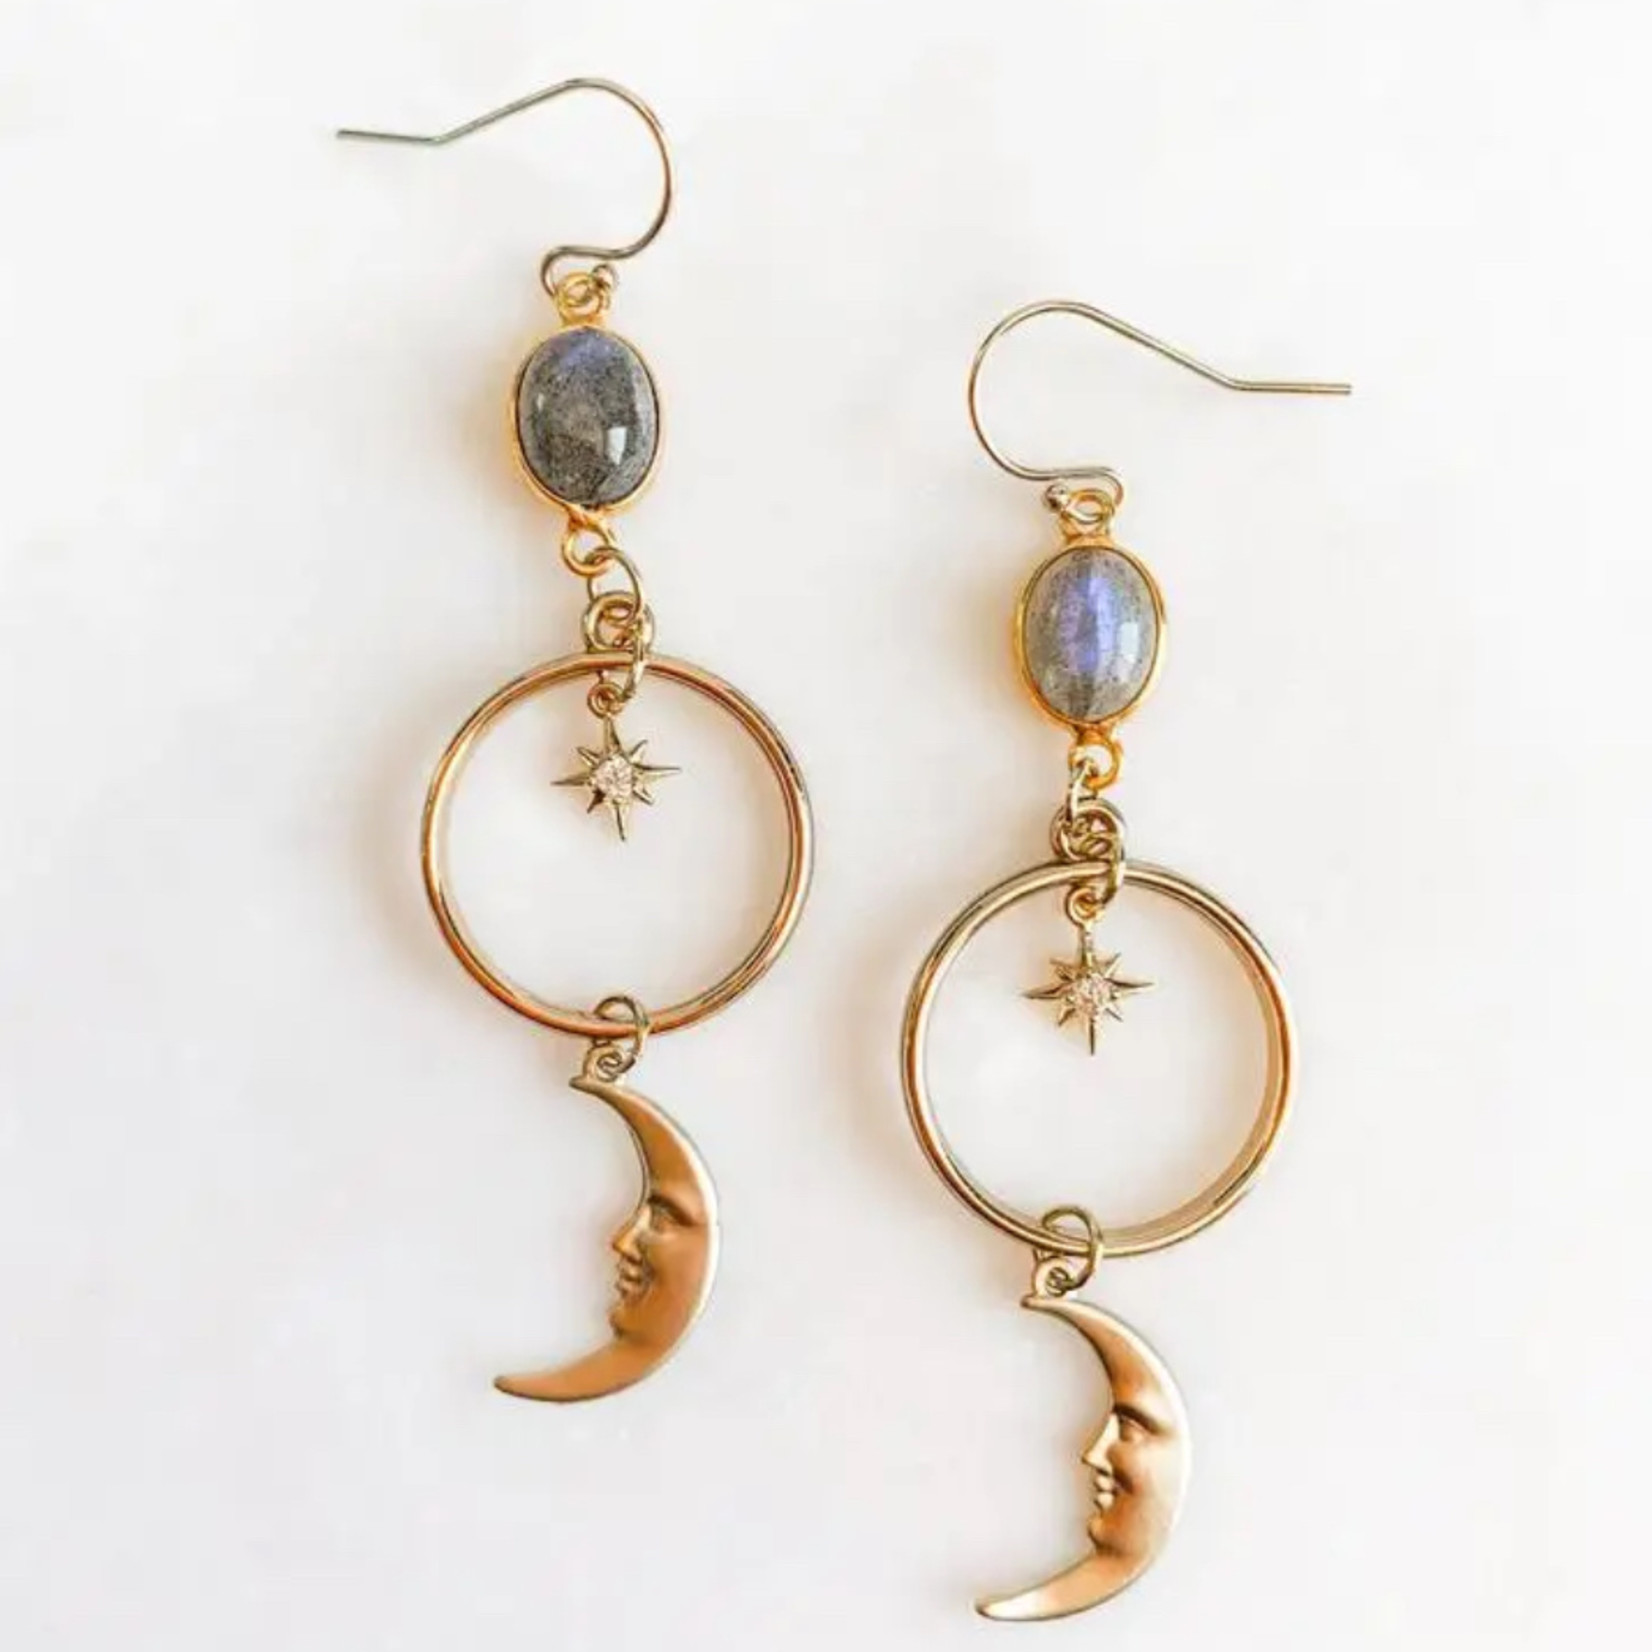 The Pretty Eclectic Midnight Moon Earrings